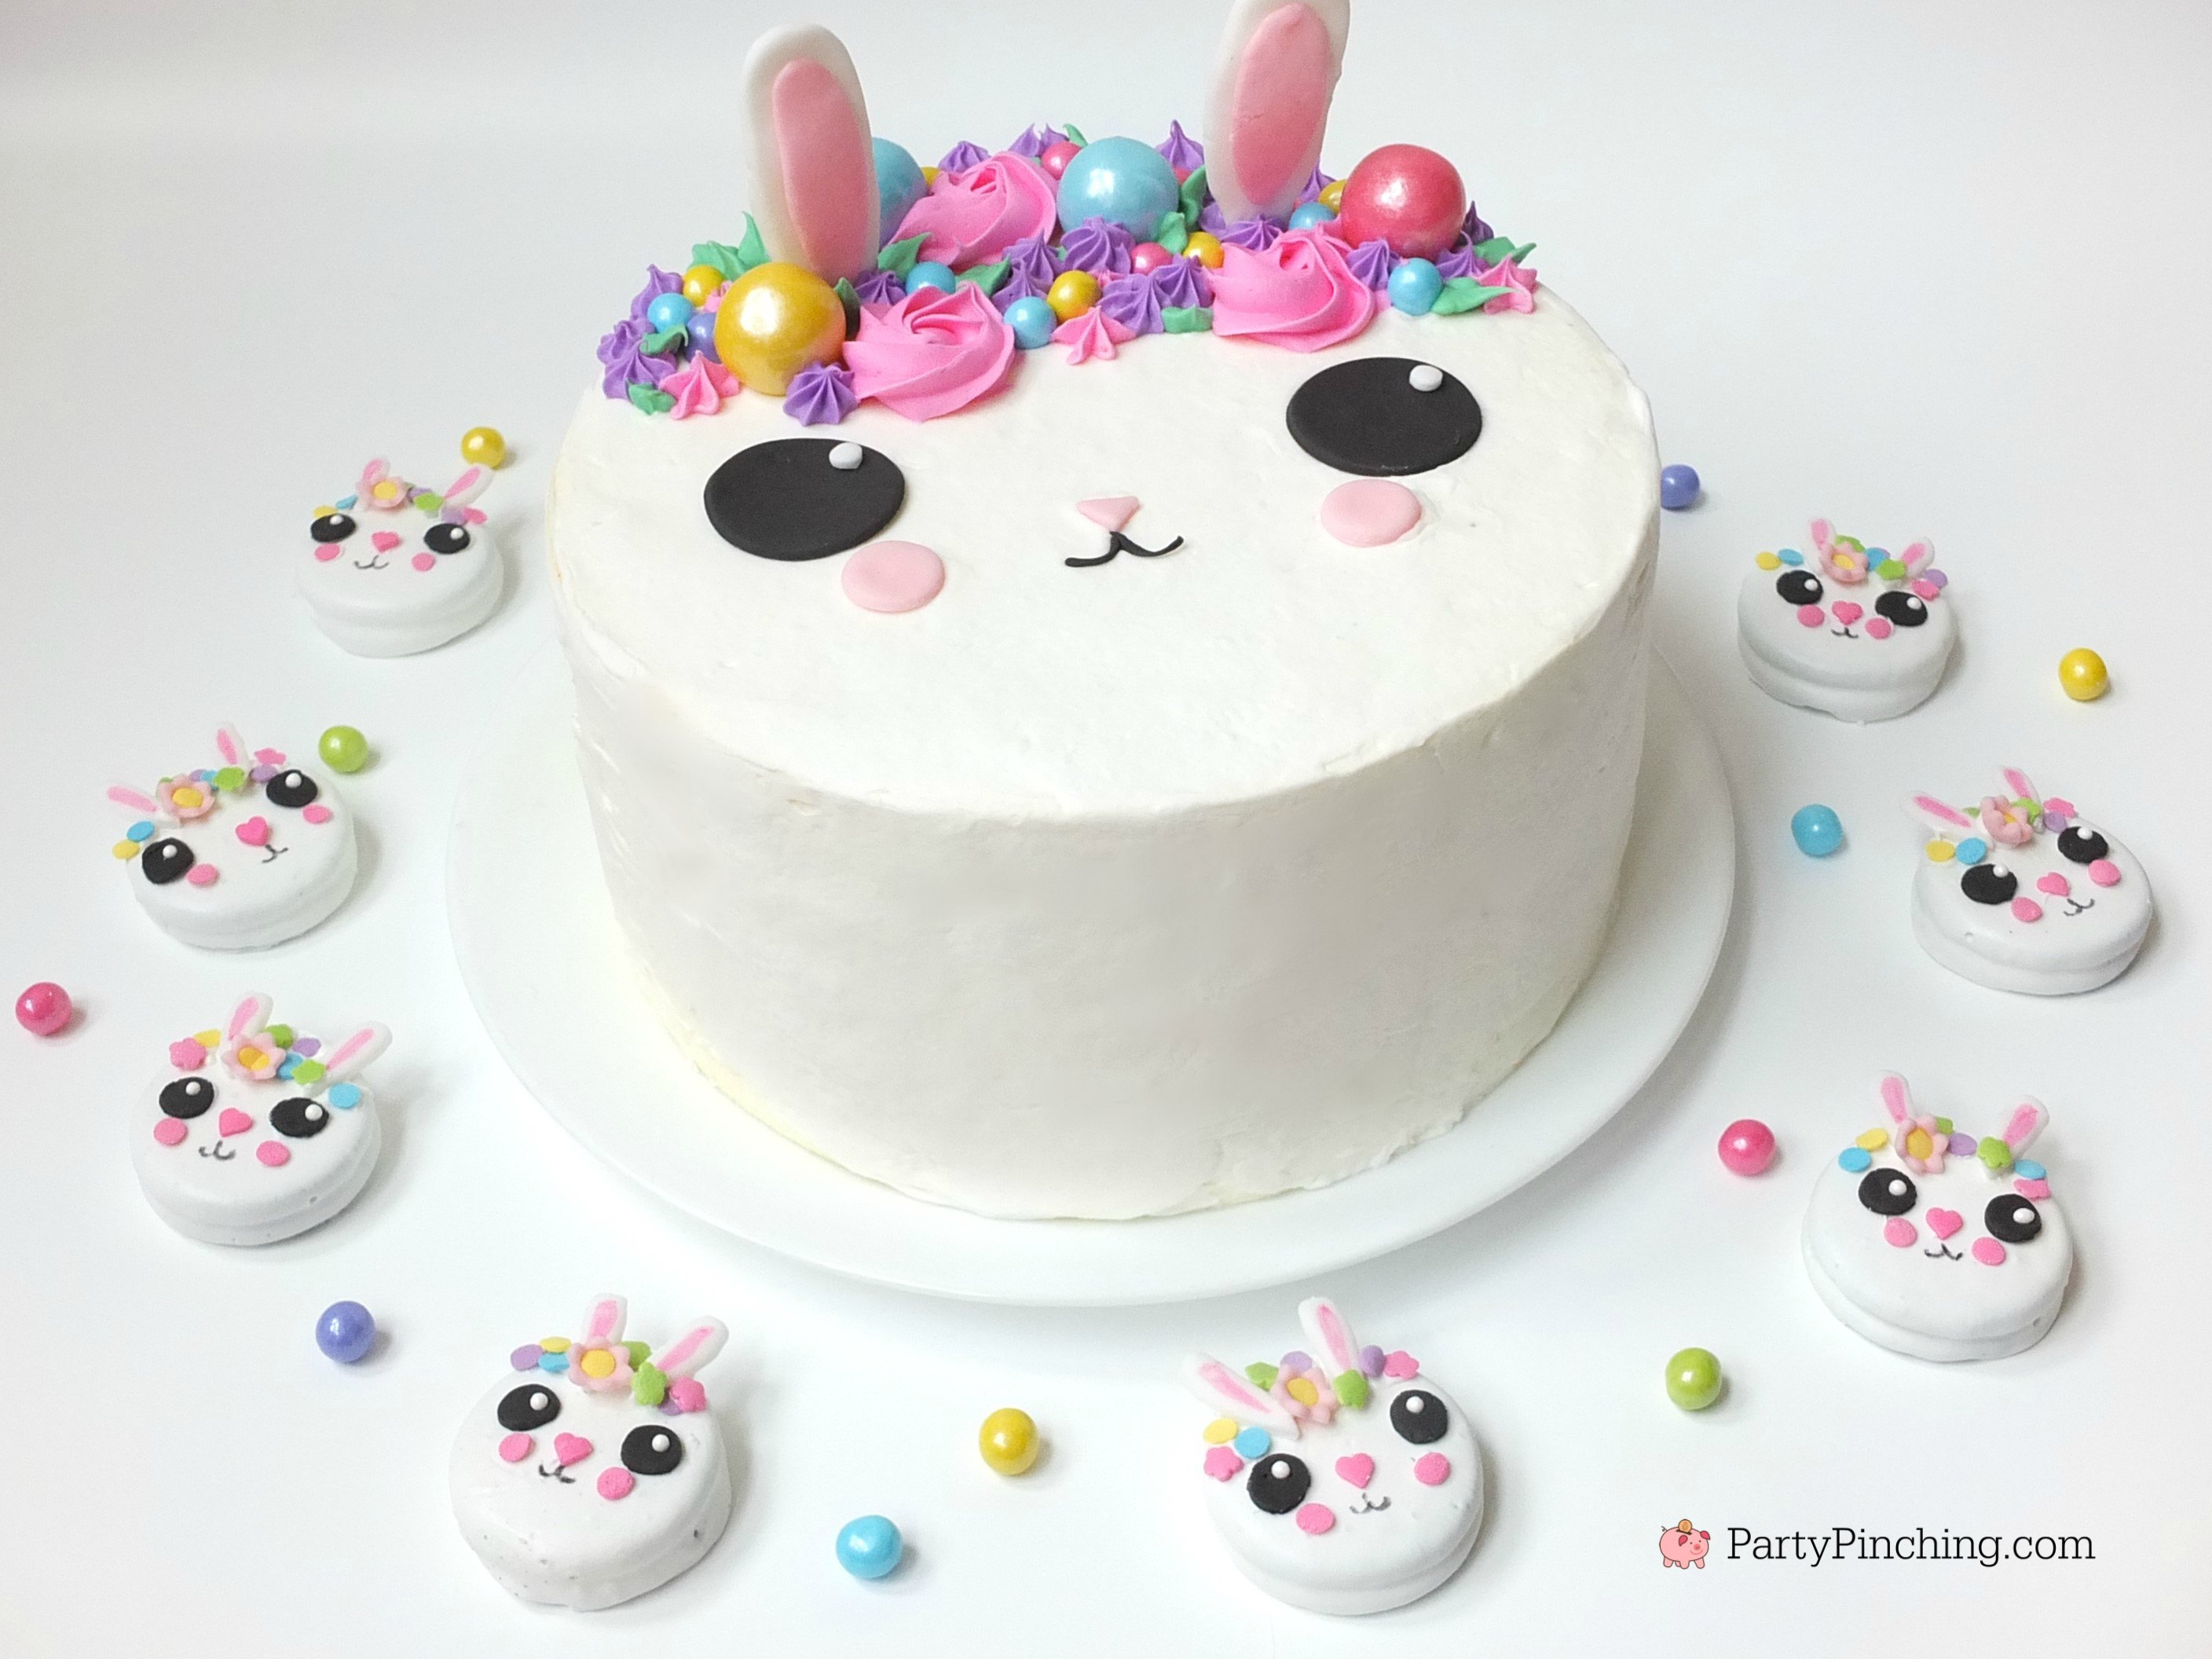 bunny cake, bunny cake with flower crown, cute kawaii bunny cake, fun easy bunny cake for Easter, sweet treats for kids, adorable rabbit cake, bunny cake with floral buttercream fondant, oreo bunny cookies, candy coated easter bunny cookies flower crown